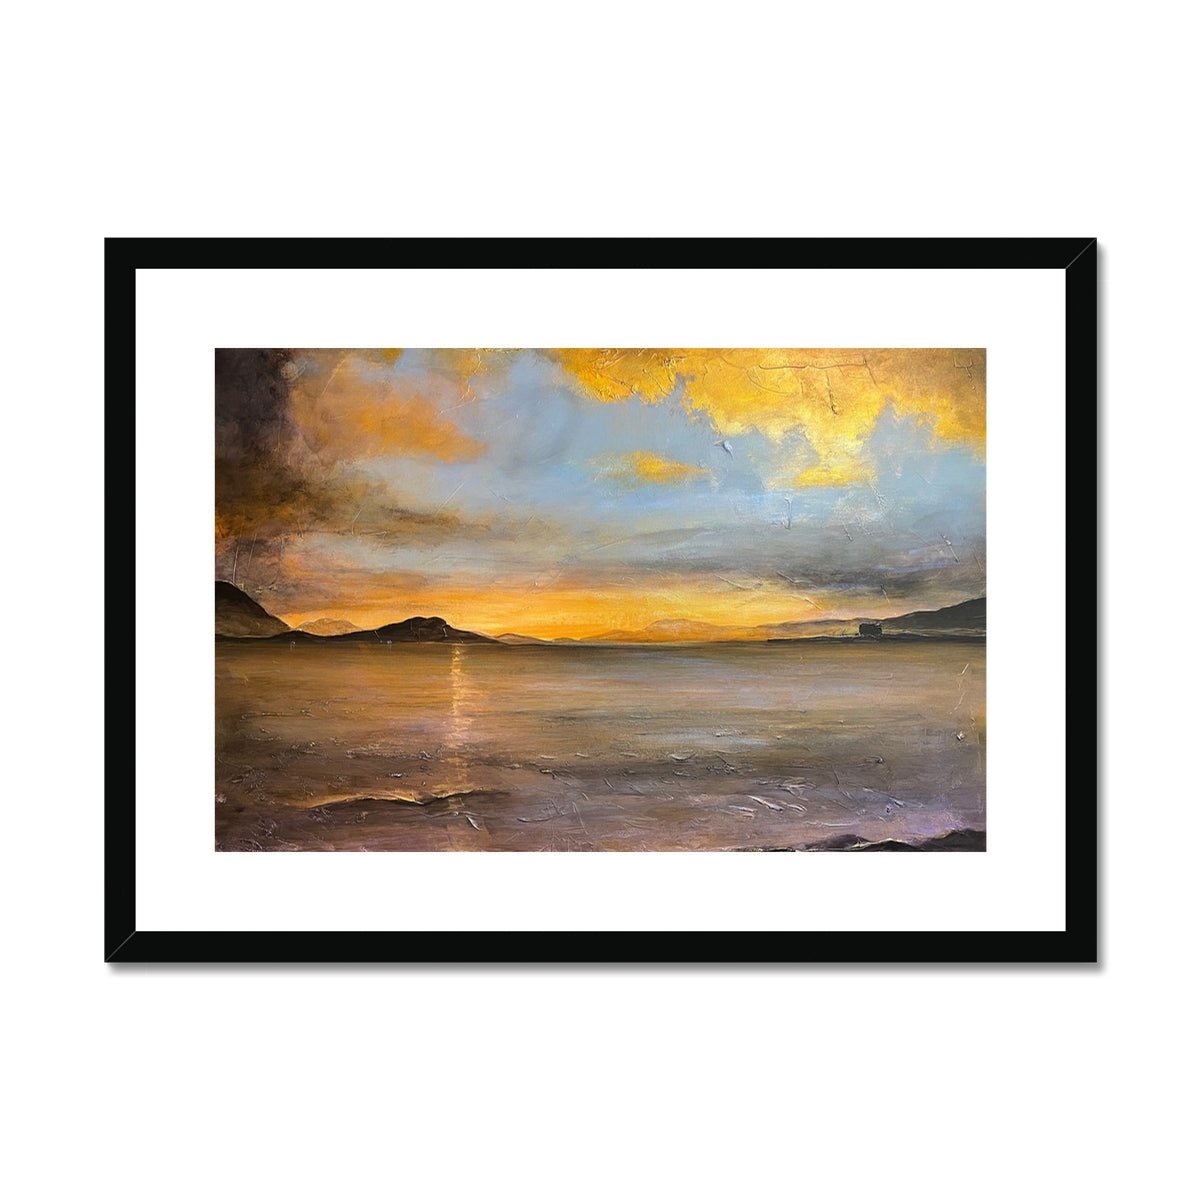 Loch Linnhe Sunset Painting | Framed & Mounted Prints From Scotland-Framed & Mounted Prints-Scottish Lochs & Mountains Art Gallery-A2 Landscape-Black Frame-Paintings, Prints, Homeware, Art Gifts From Scotland By Scottish Artist Kevin Hunter